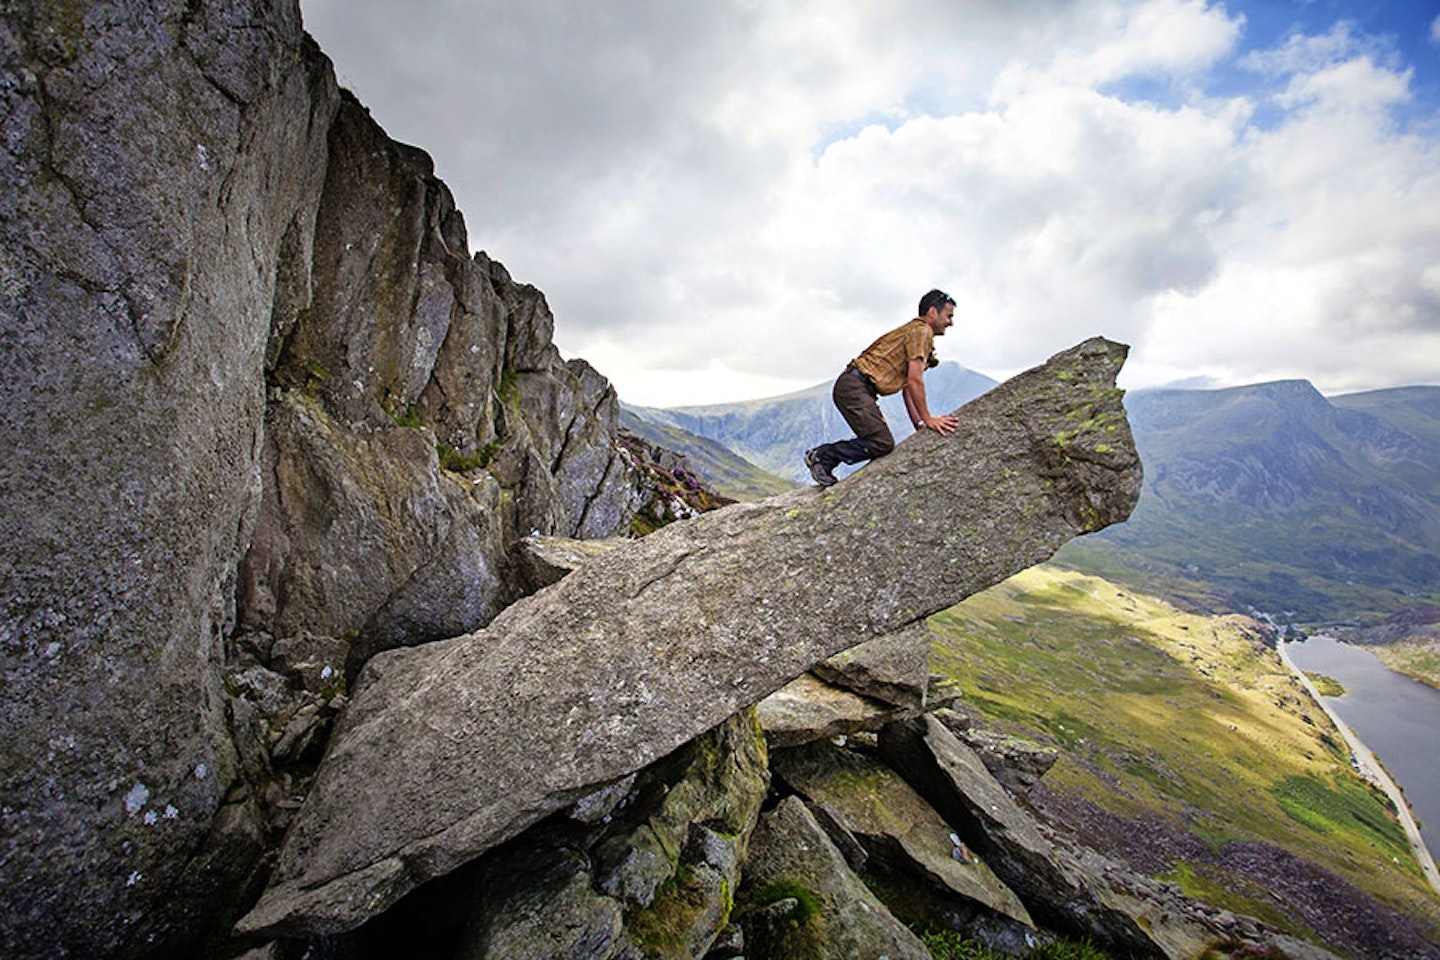 More rides than an amusement park  – the Cannon Stone on Tryfan.